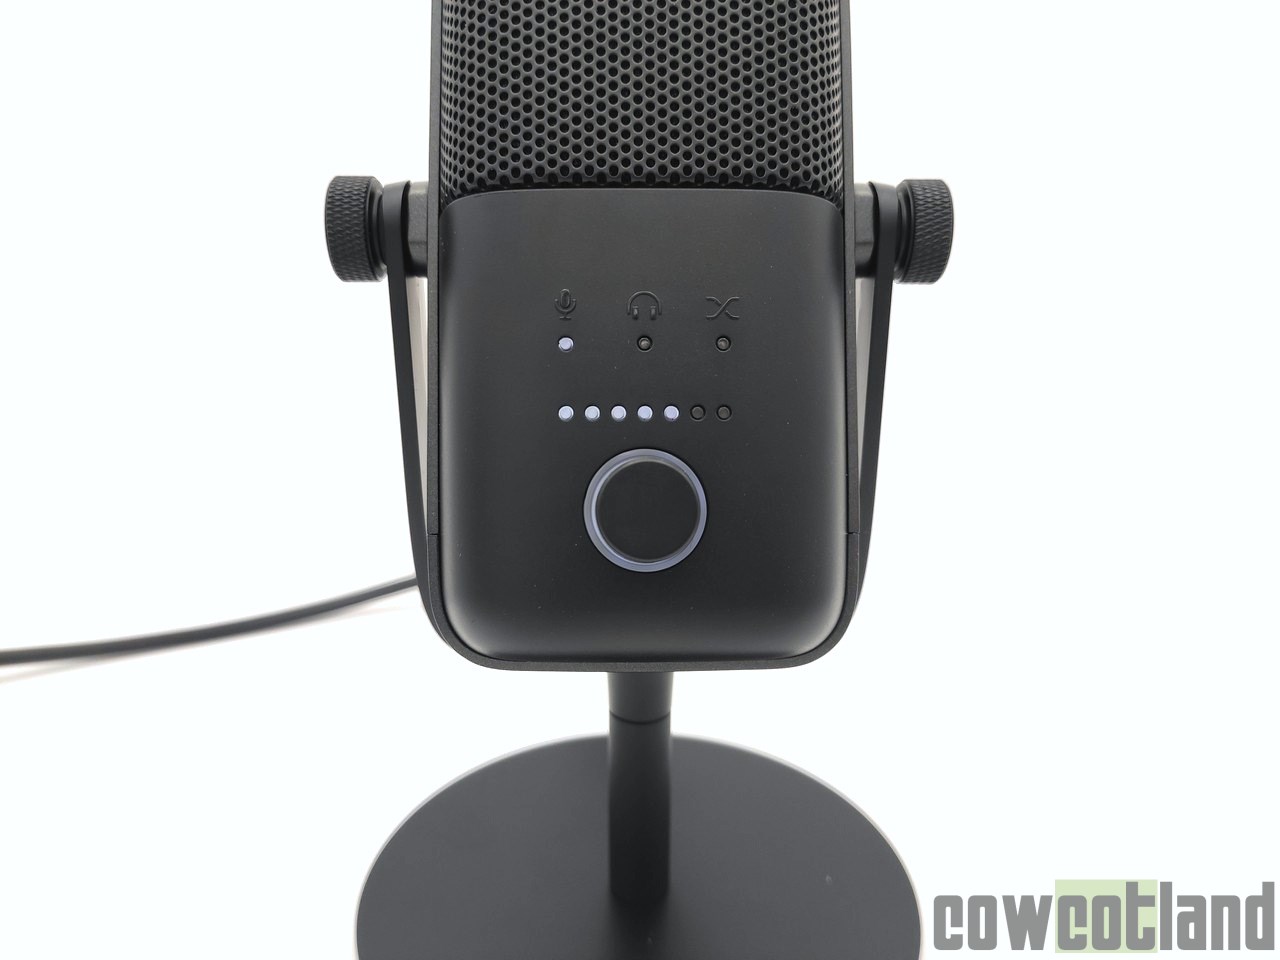 Image 44884, galerie Test Elgato Wave:3, un microphone cardiode USB taill pour le streaming